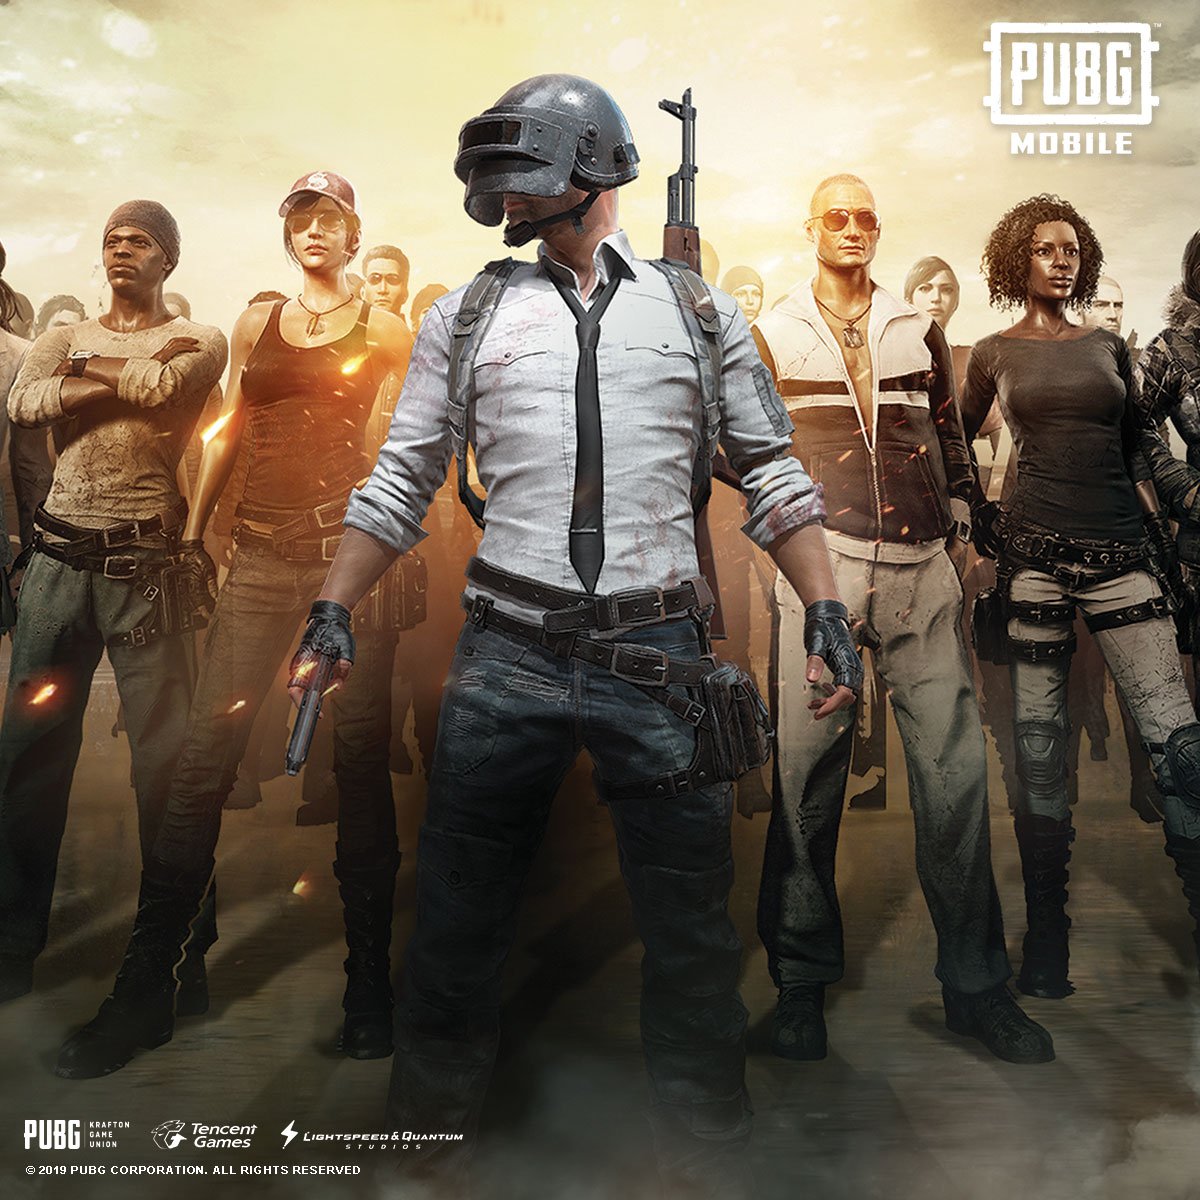 Pubg Mobile We Continue To Ban Cheaters In Pubg Mobile As Part Of Our Commitment To Fair Gameplay Visit Our Website For A Partial List Of Players Banned Between July